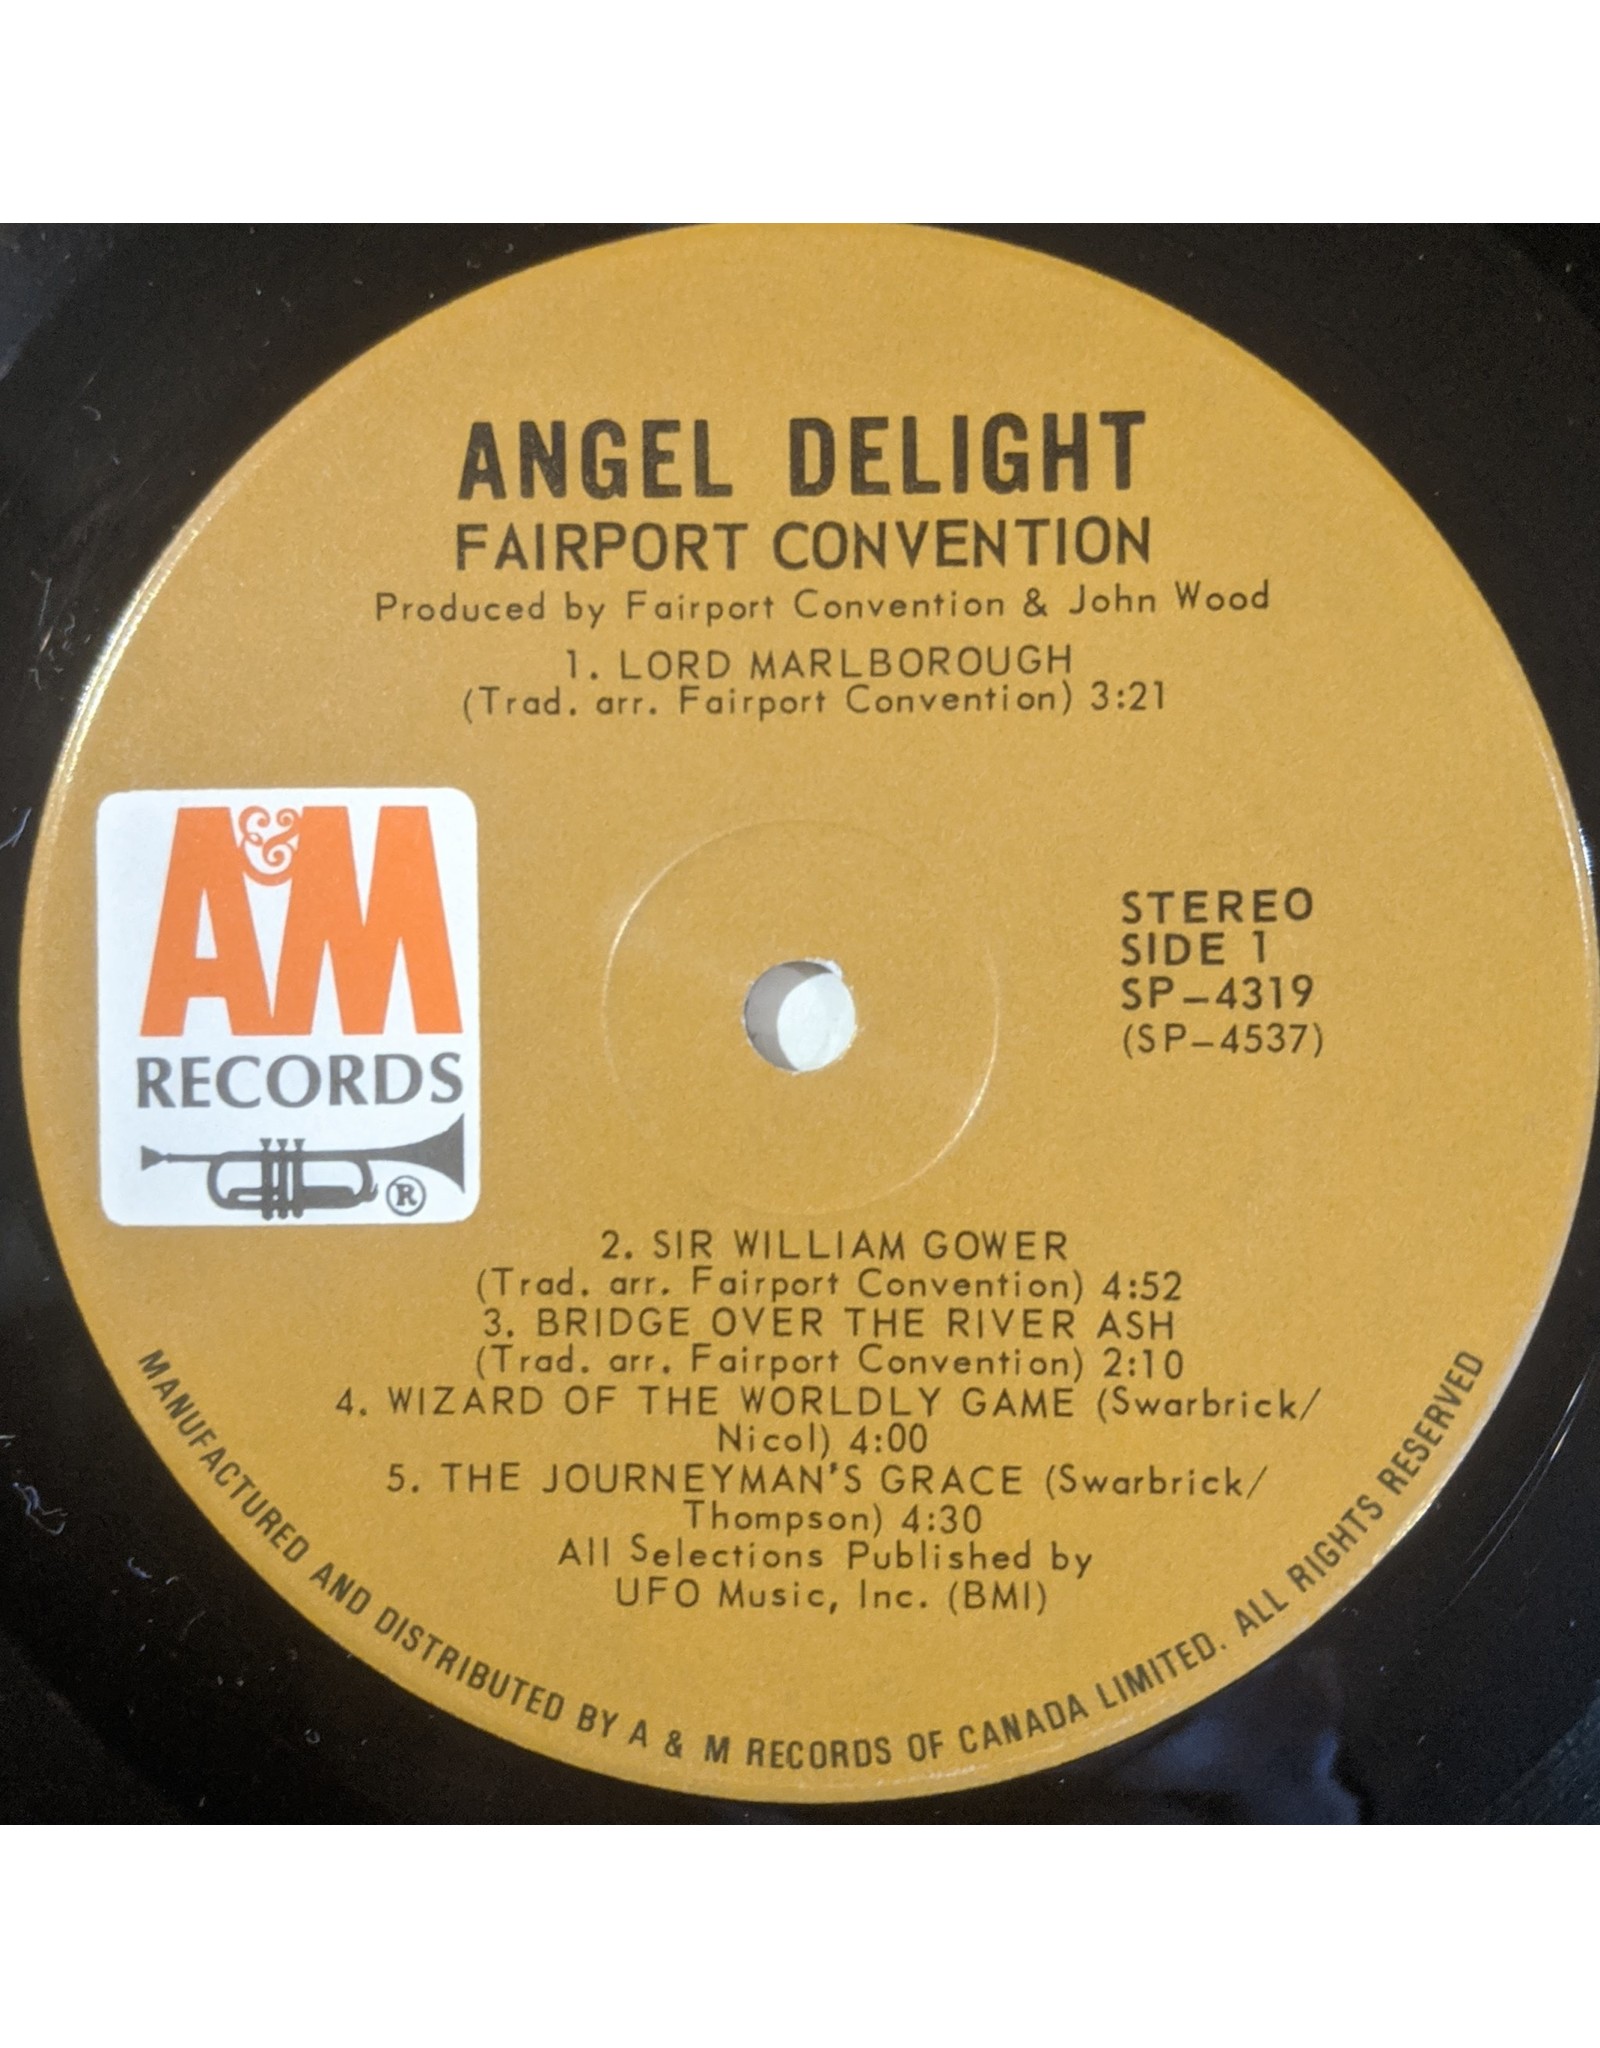 USED: Fairport Convention: Angel Delight LP